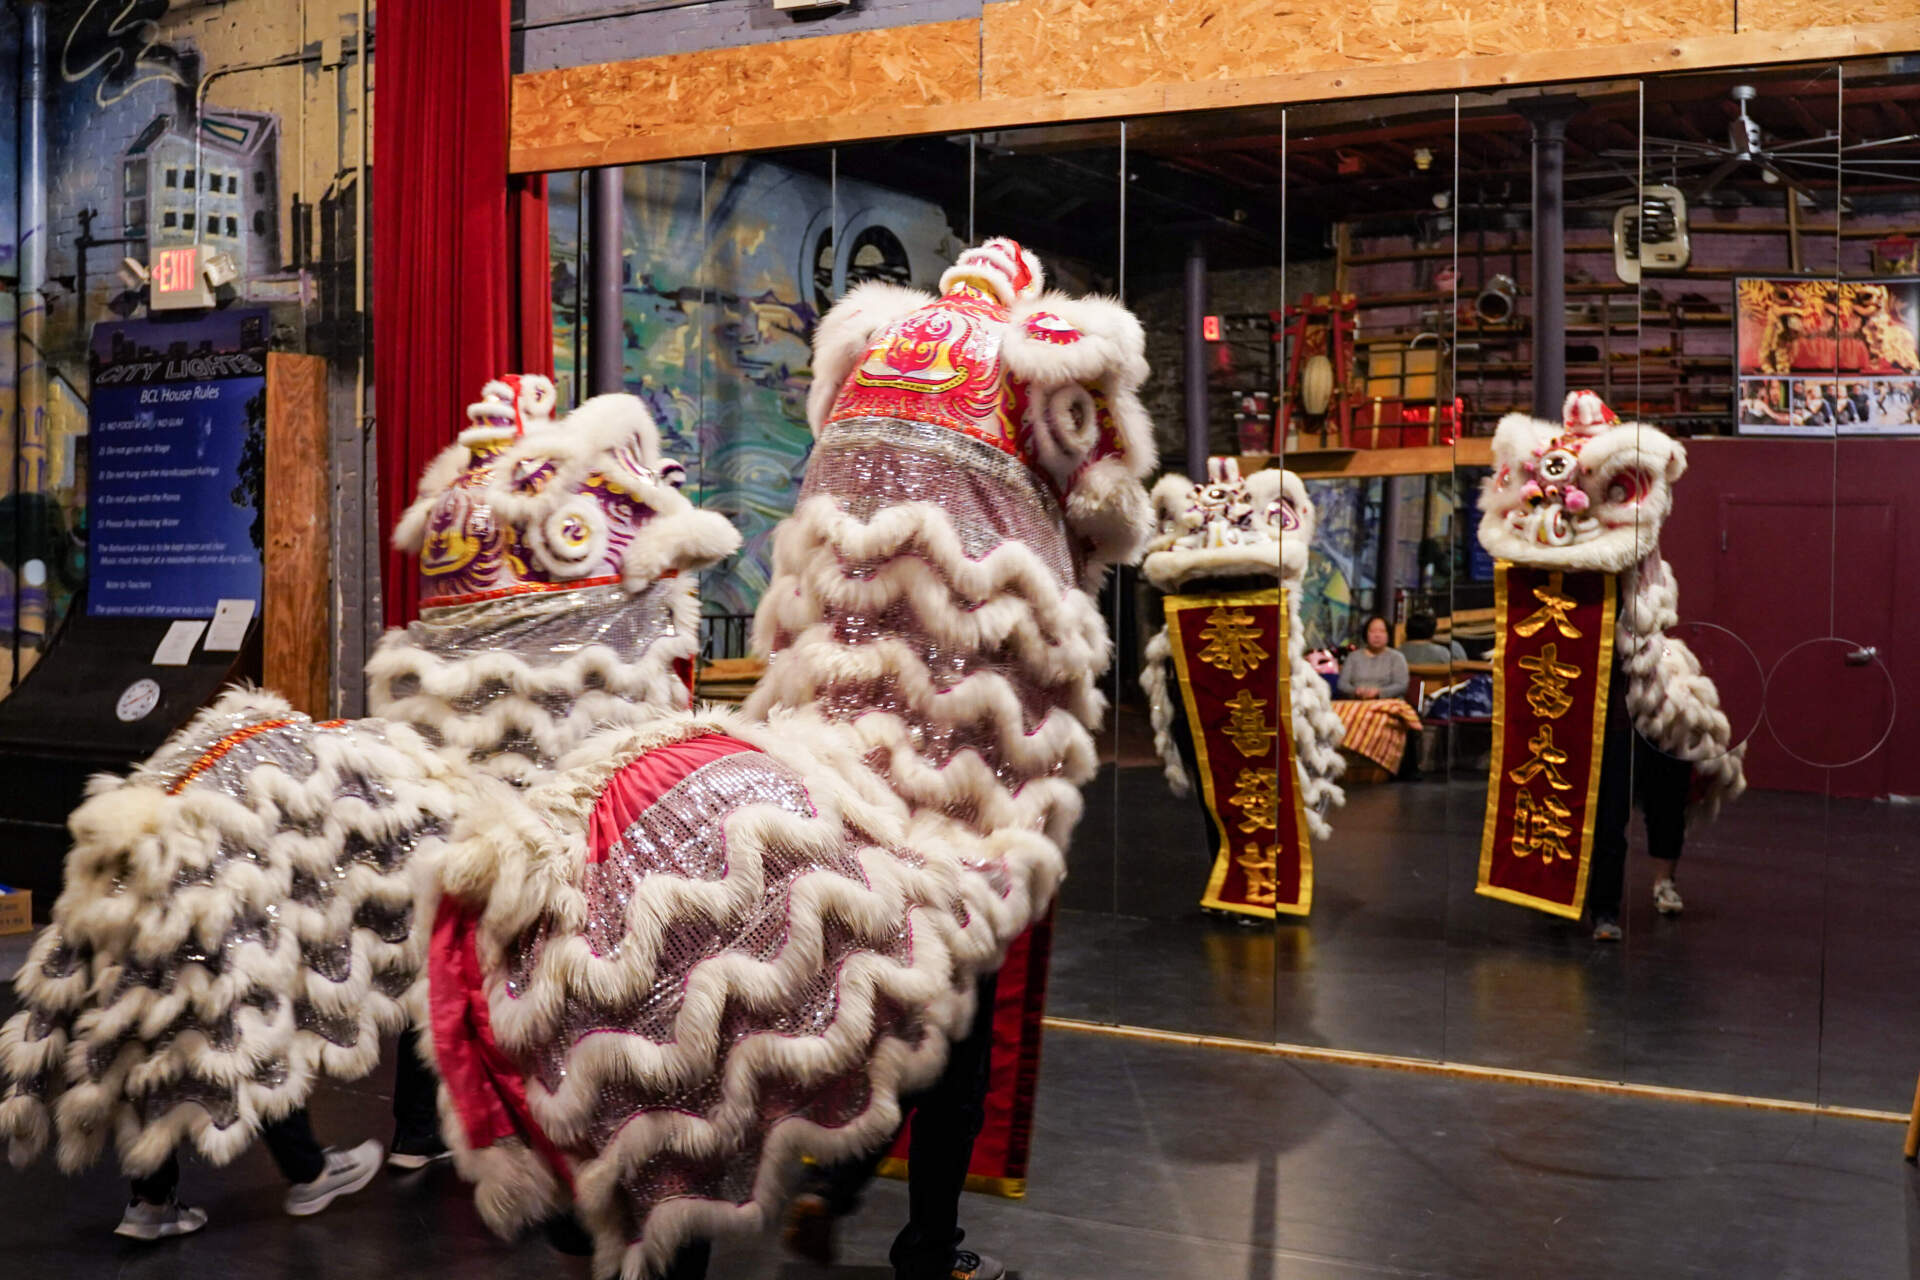 Members of the Nüwa Athletic Club practice for the lion dance performance at Pao Arts Center on Sunday. (Cici Yu/WBUR)